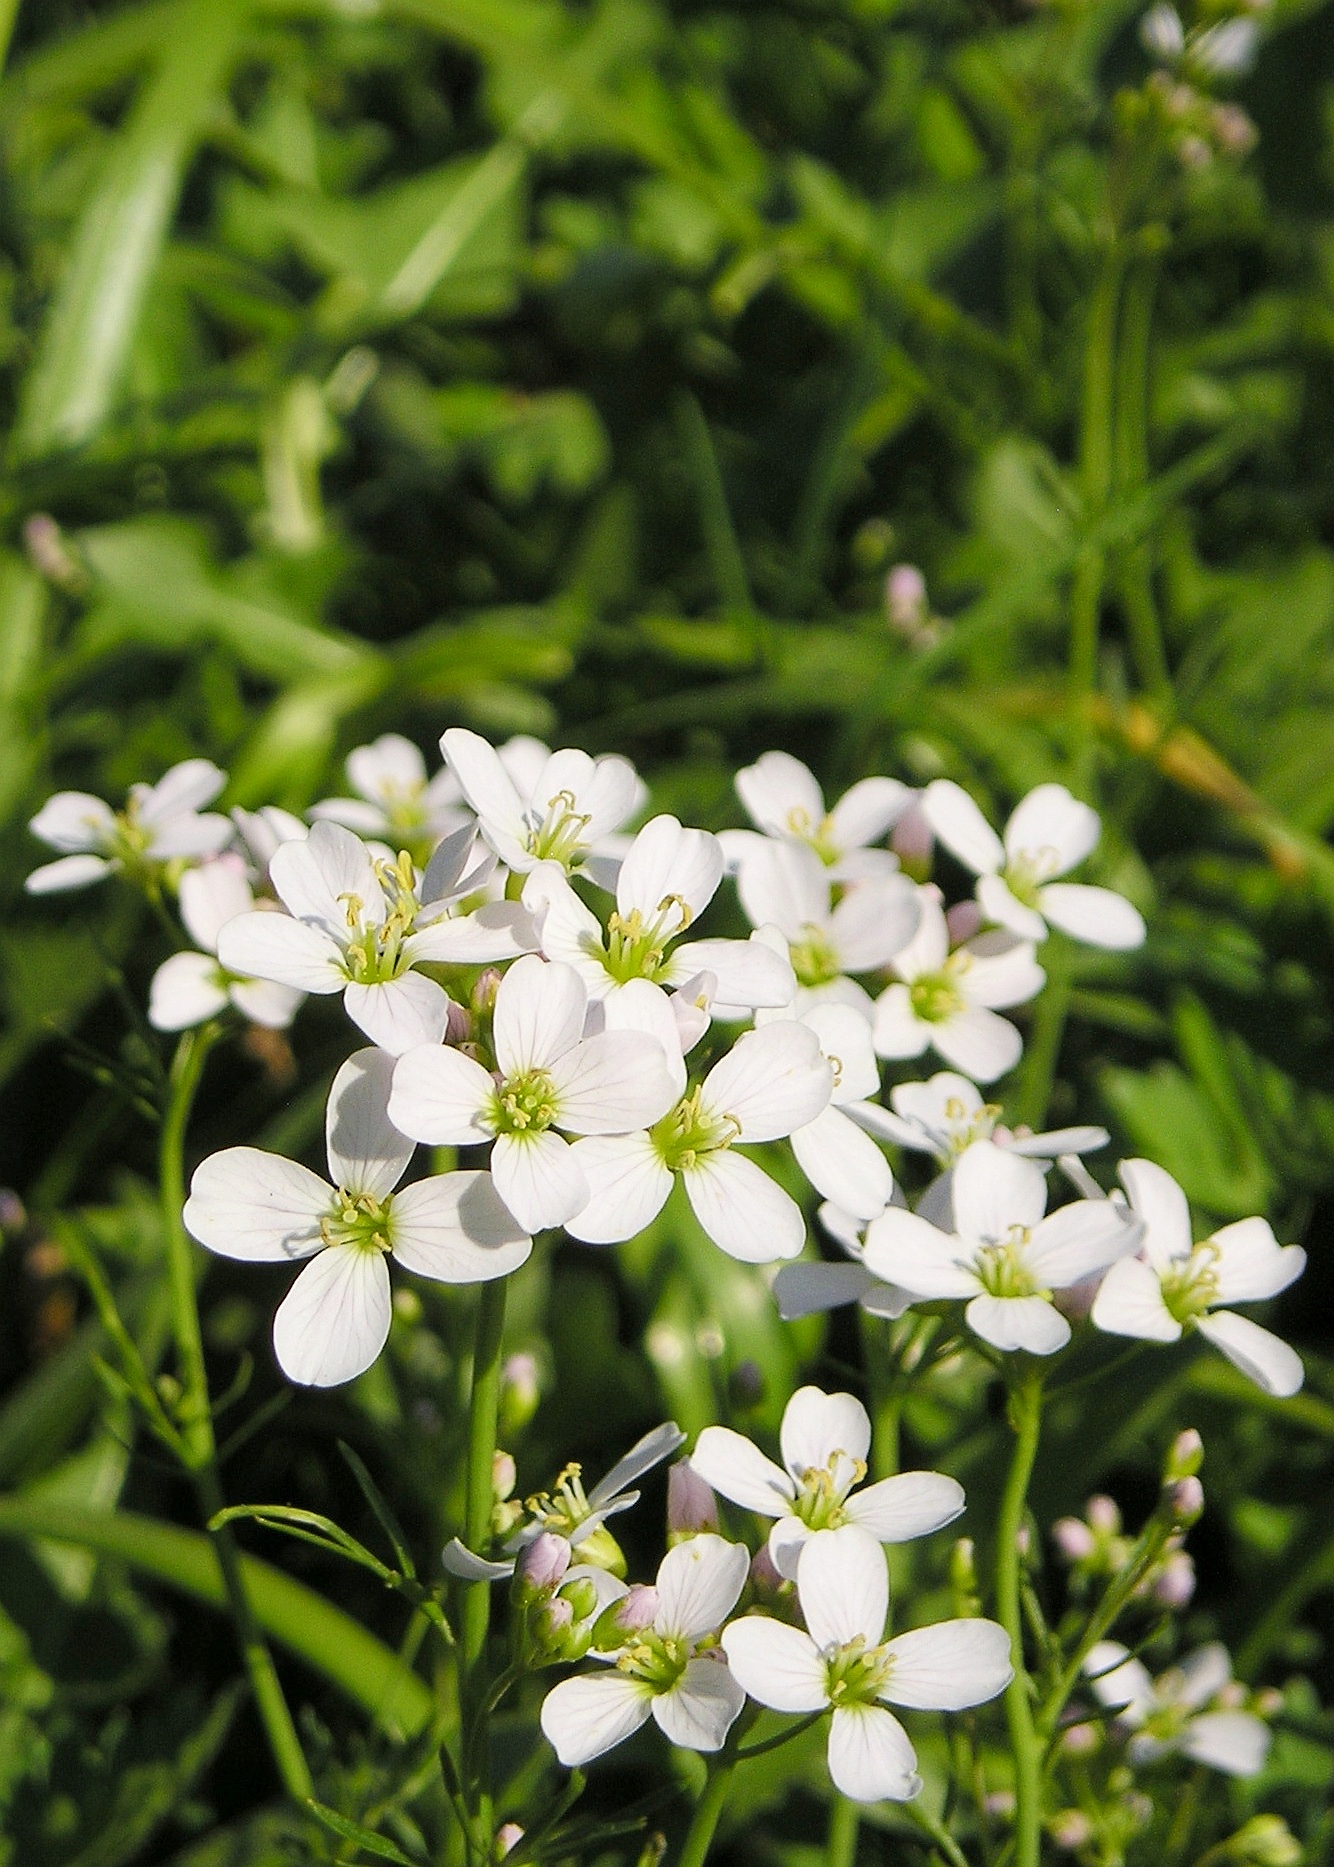 small white flowers grow in the grass near some long grass